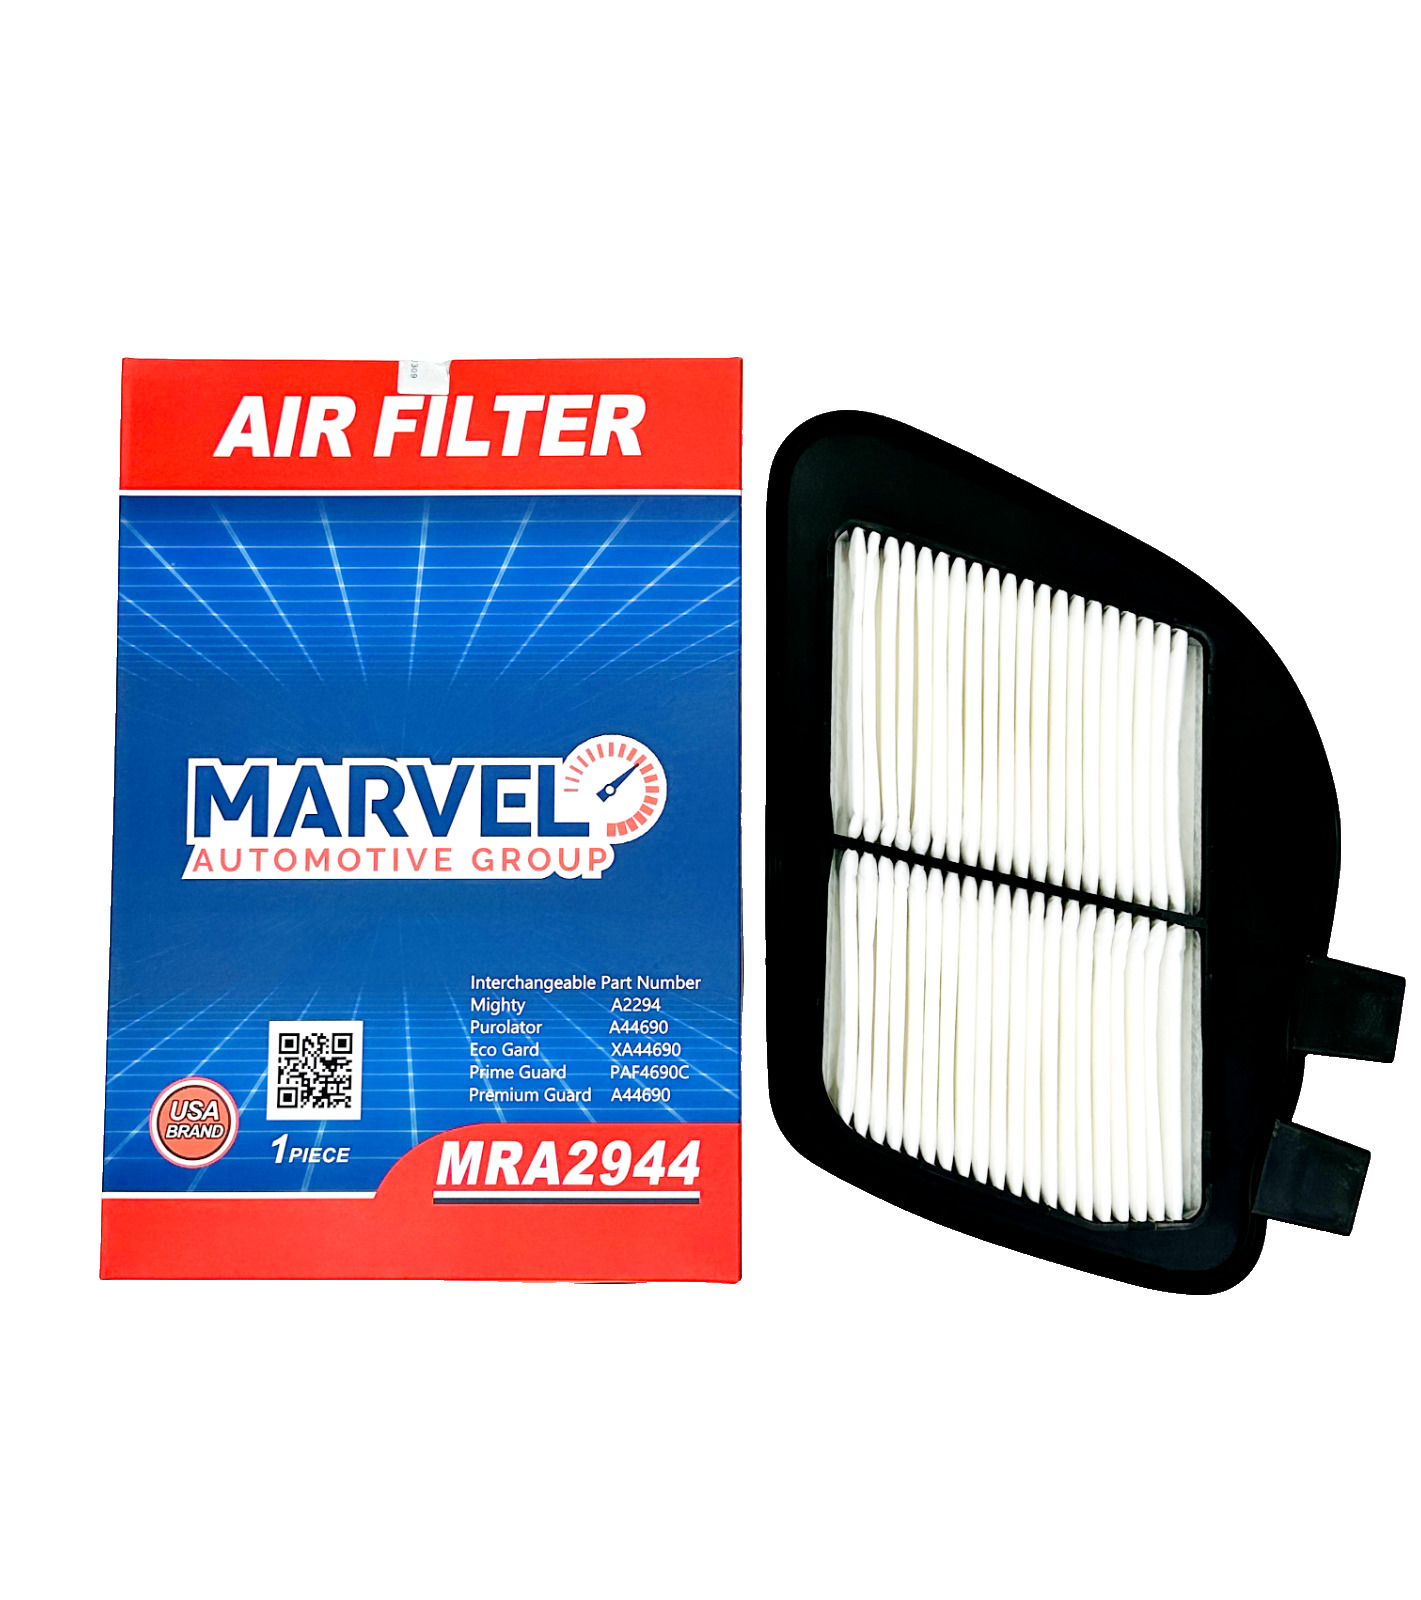 Marvel Air Filter MRA2944 (25735595) for Cadillac SRX 2004-2009, STS 2005-2011